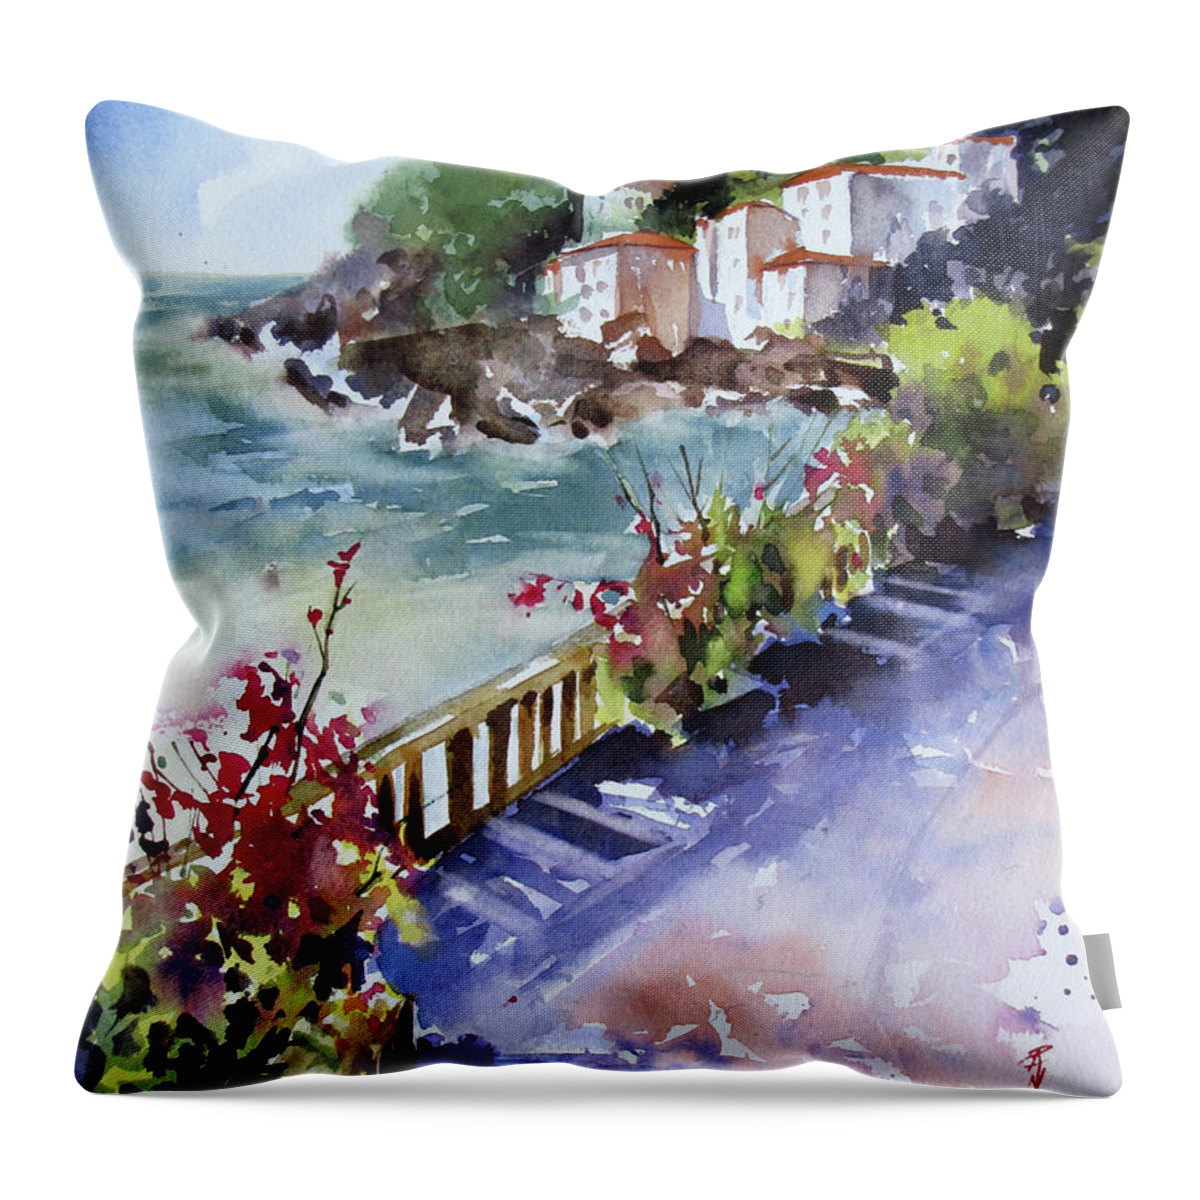 Europe Scene Throw Pillow featuring the painting From The Walkway by Rae Andrews